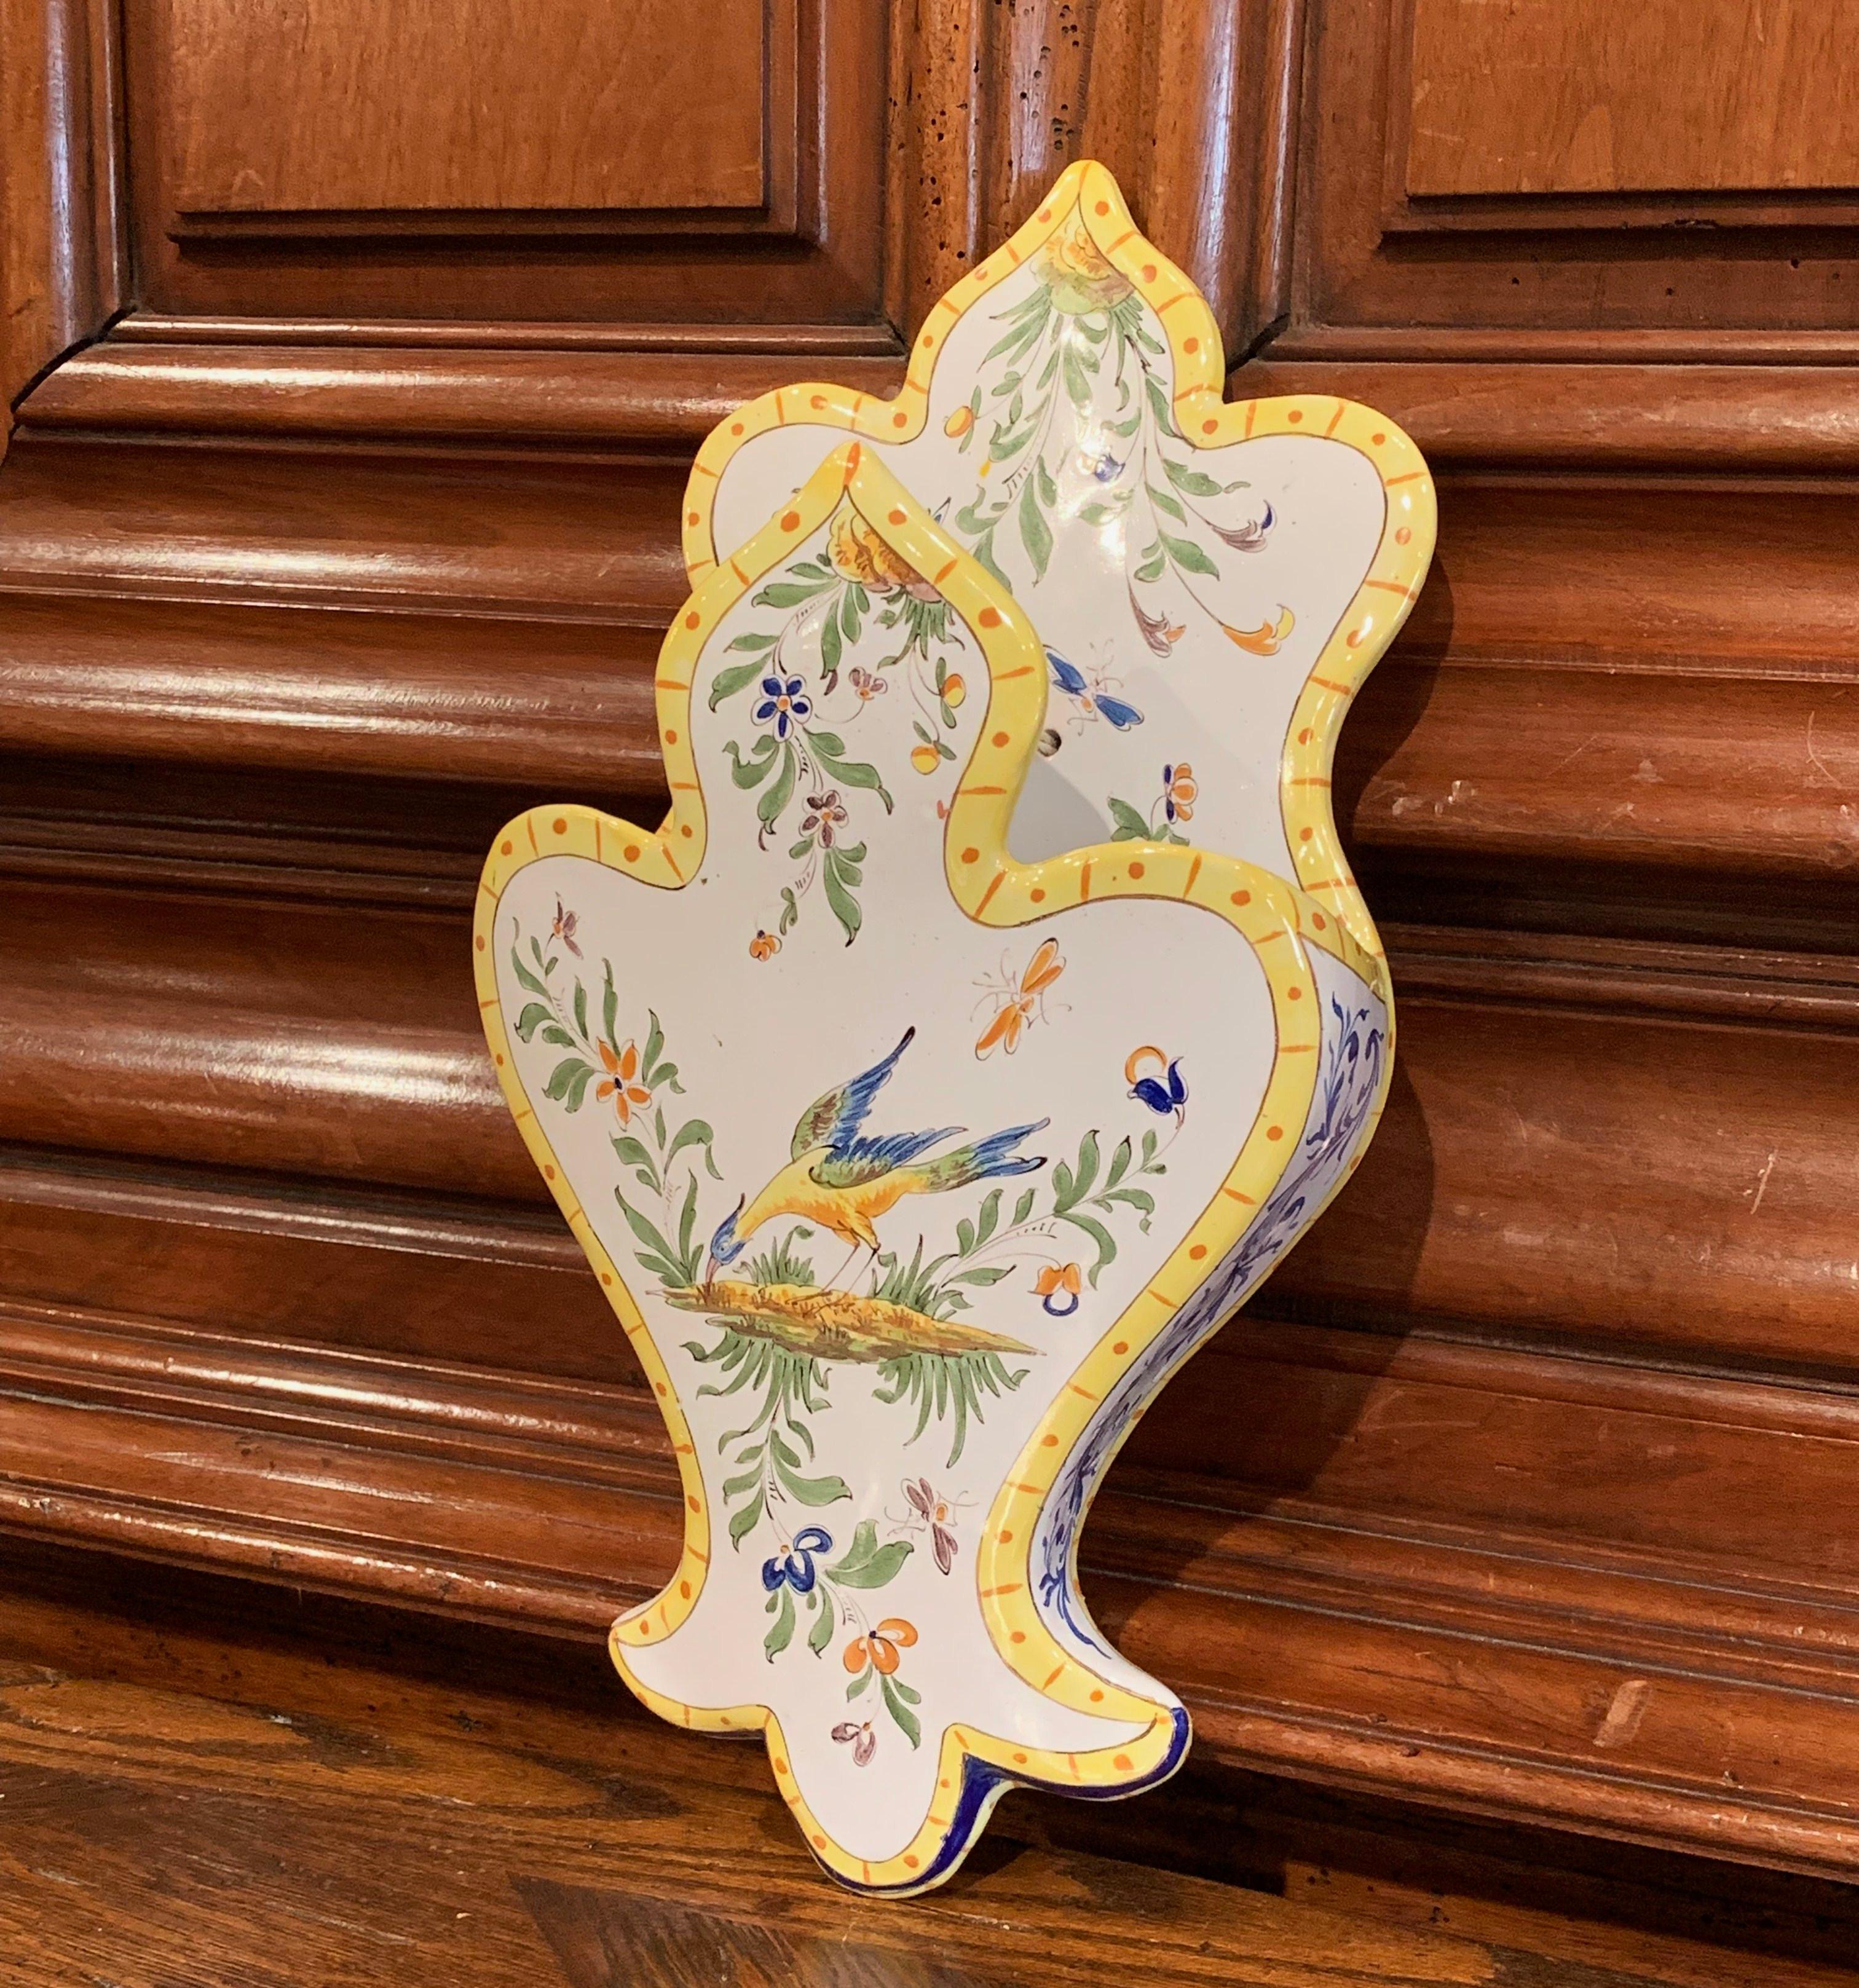 Decorate a wall or a shelf with this elegant antique ceramic letter holder from Normandy, France; crafted circa 1950, the colorful wall piece with scroll shapes features hand painted decorations including bird, flowers and foliage. The faience piece